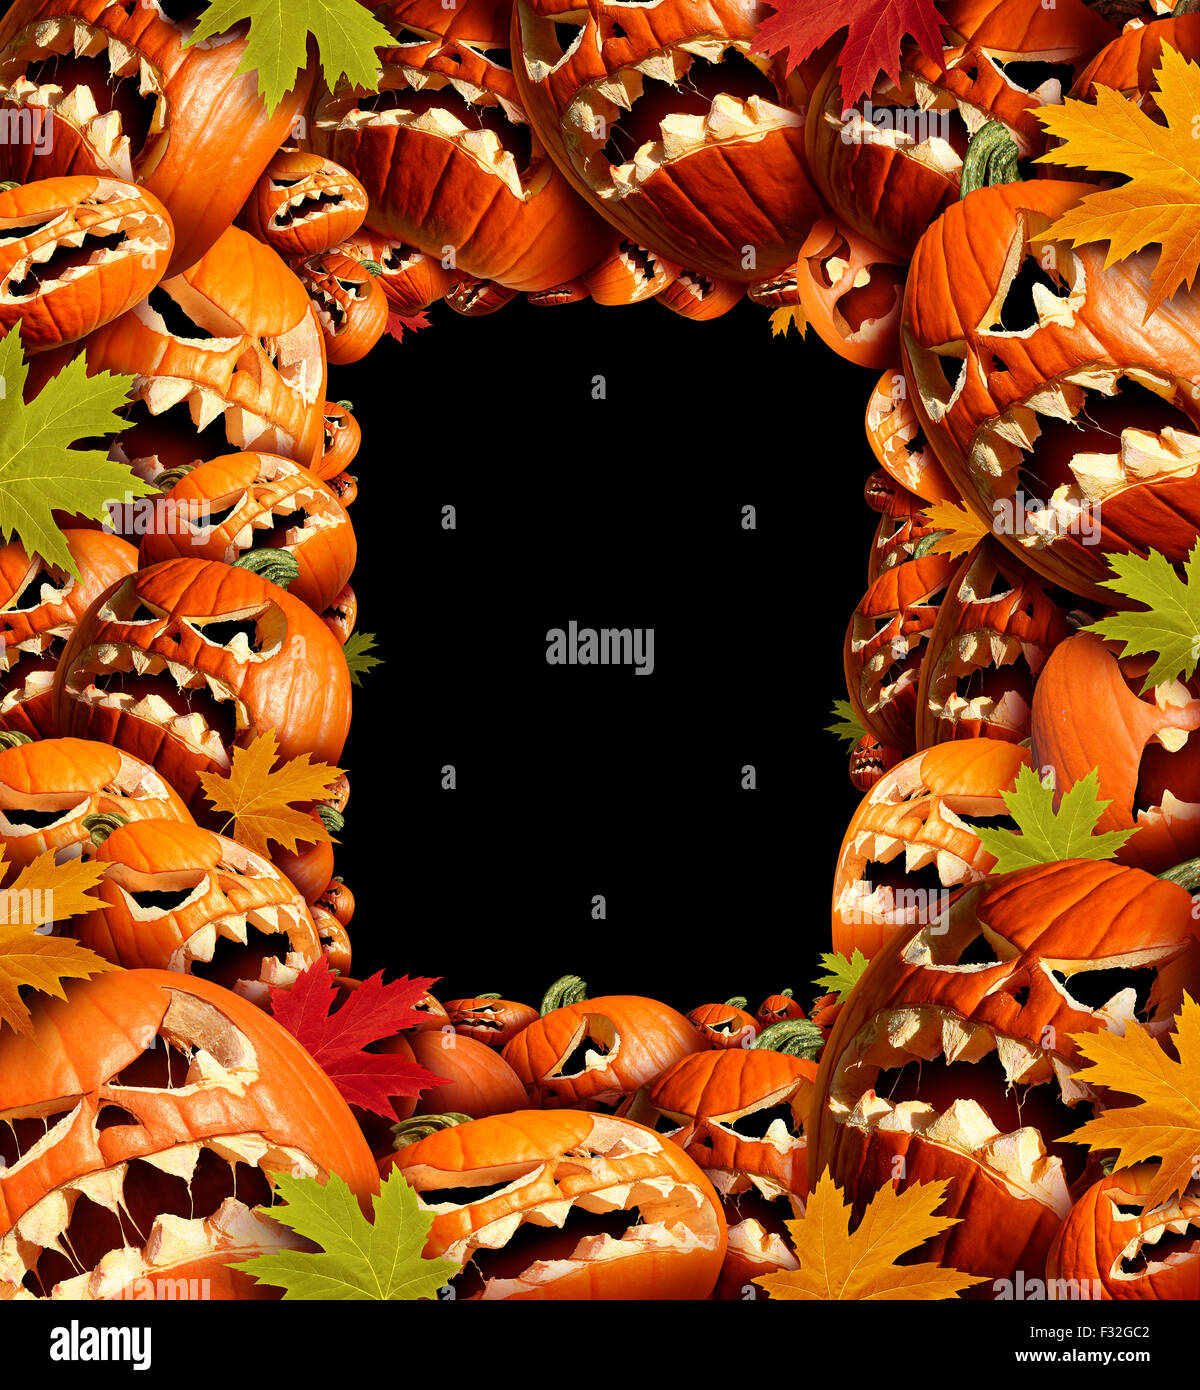 Halloween vertical border frame with empty blank copy space as a group of carved jackolantern pumpkin group and fall leaves as a concept and design element for a creepy advertisement and marketing announcement for an autumn time party. Stock Photo